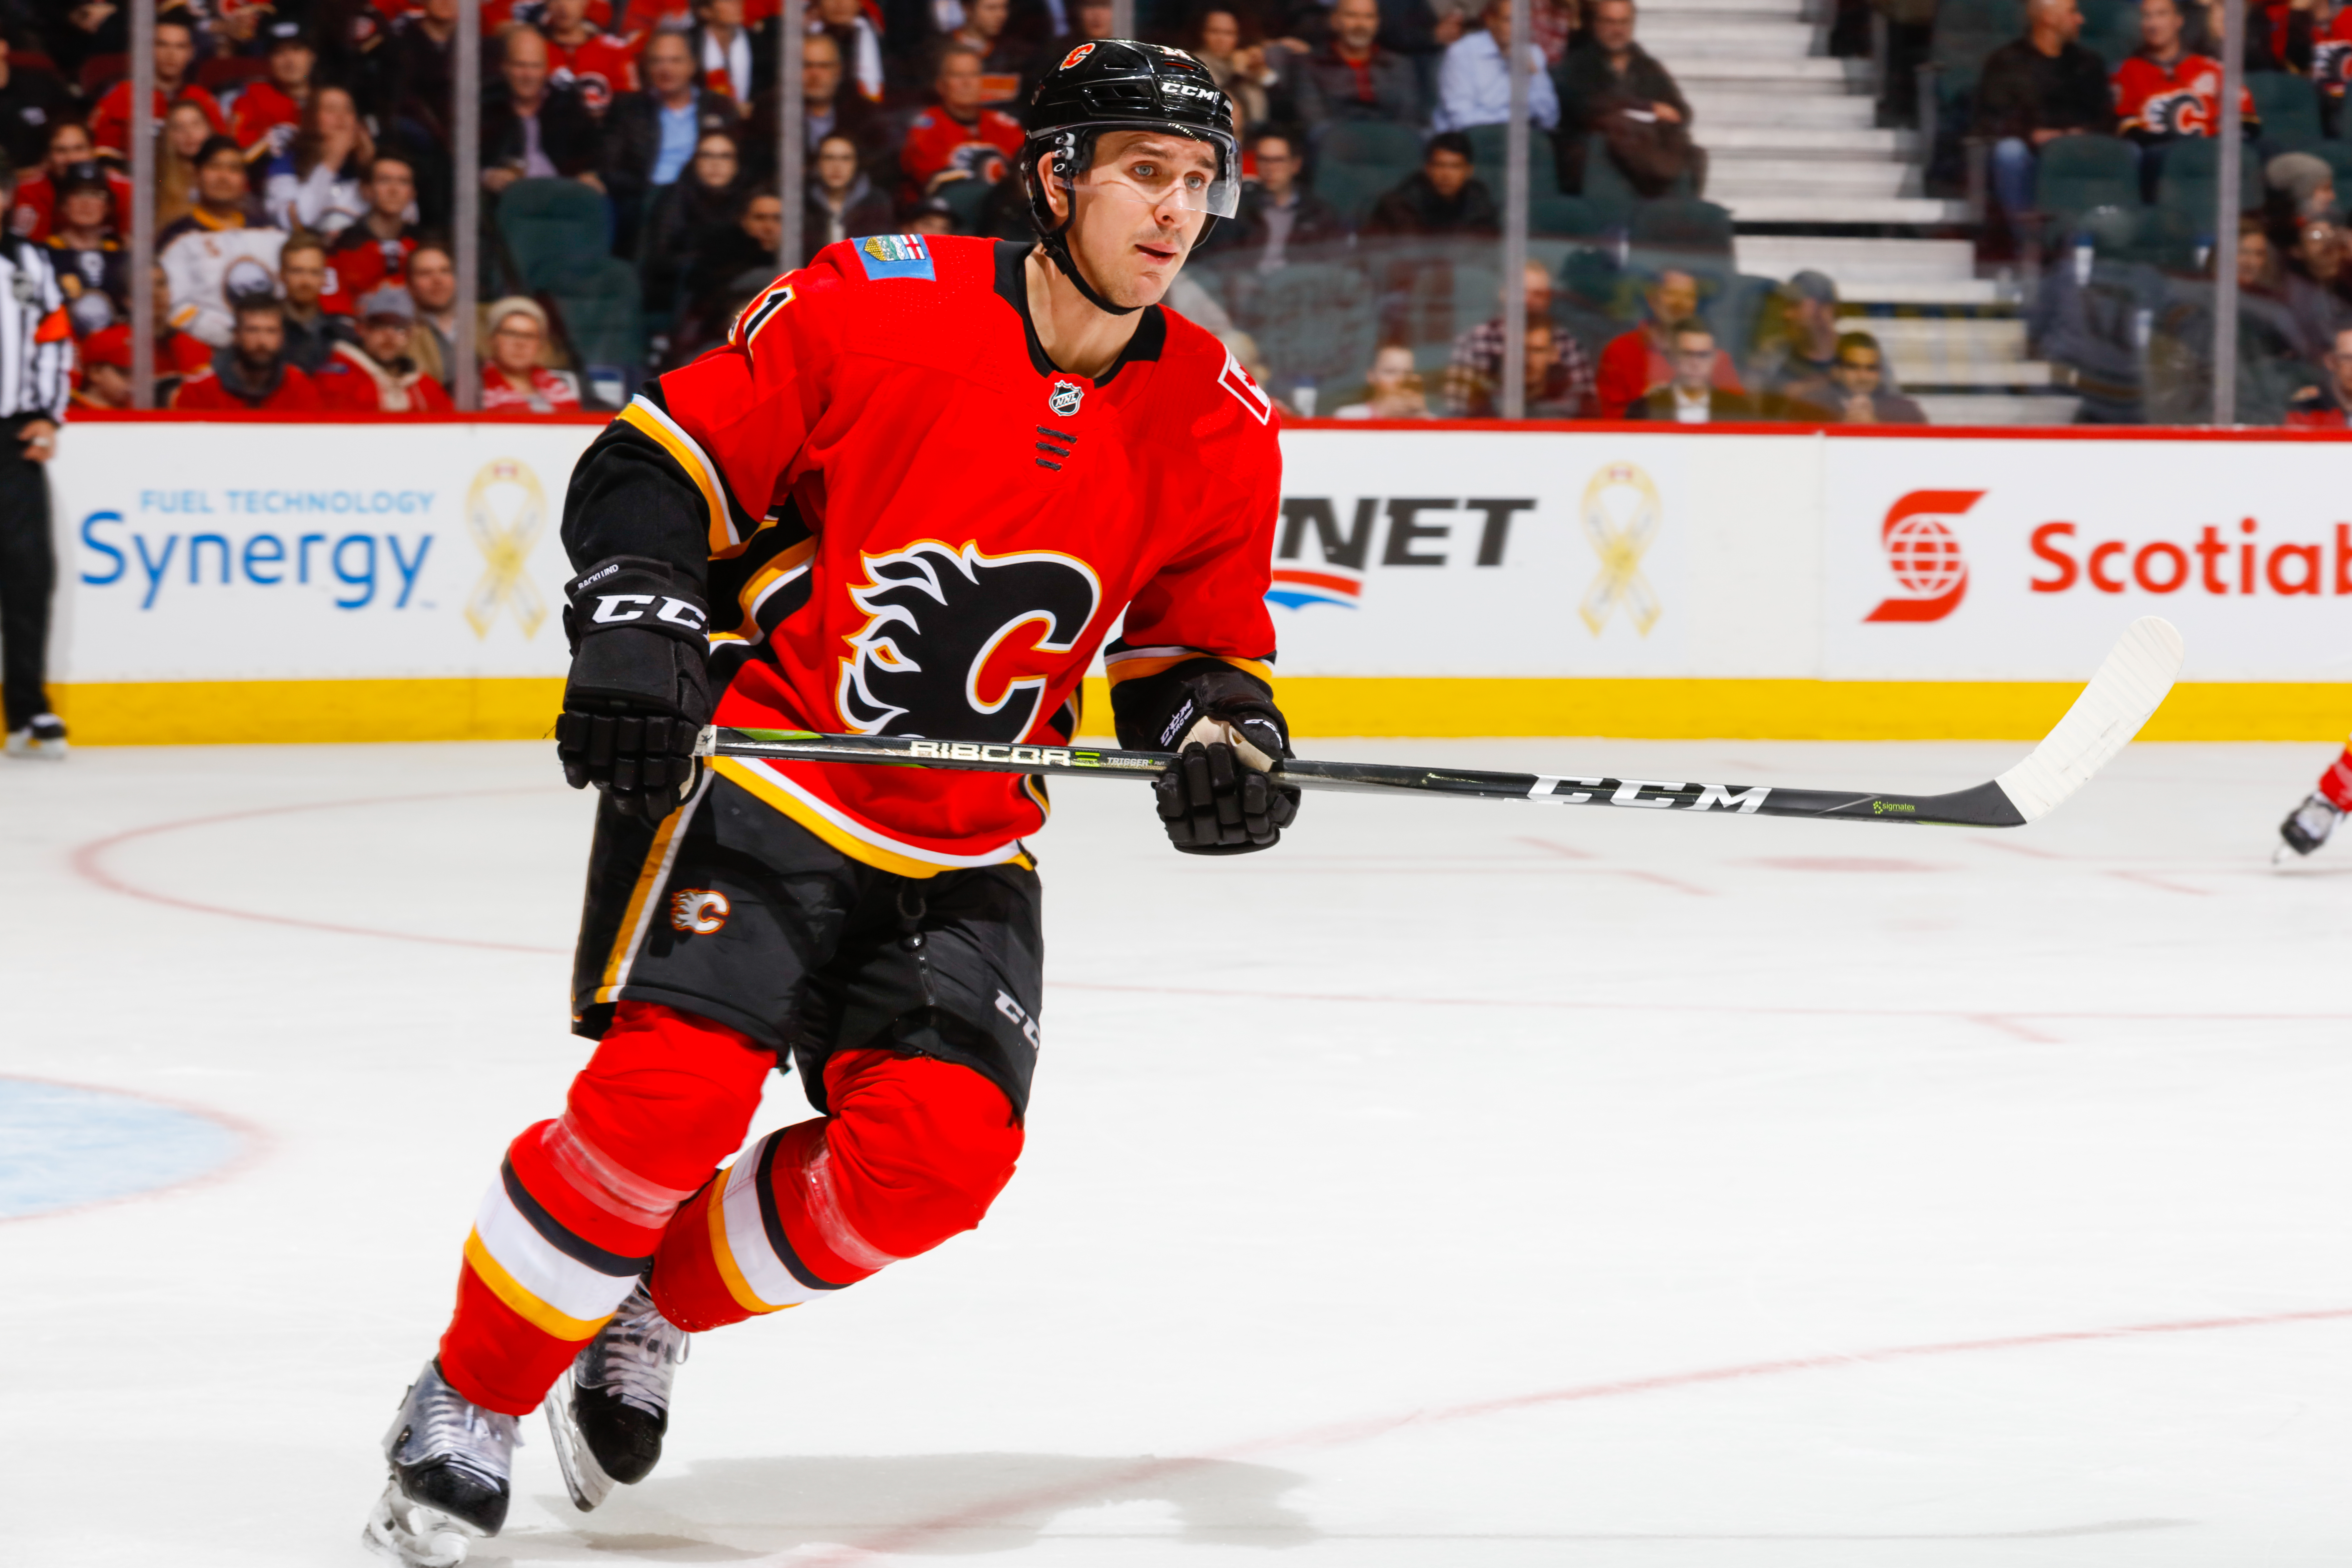 Calgary Flames sign centre Mikael Backlund to 6-year contract extension -  Calgary